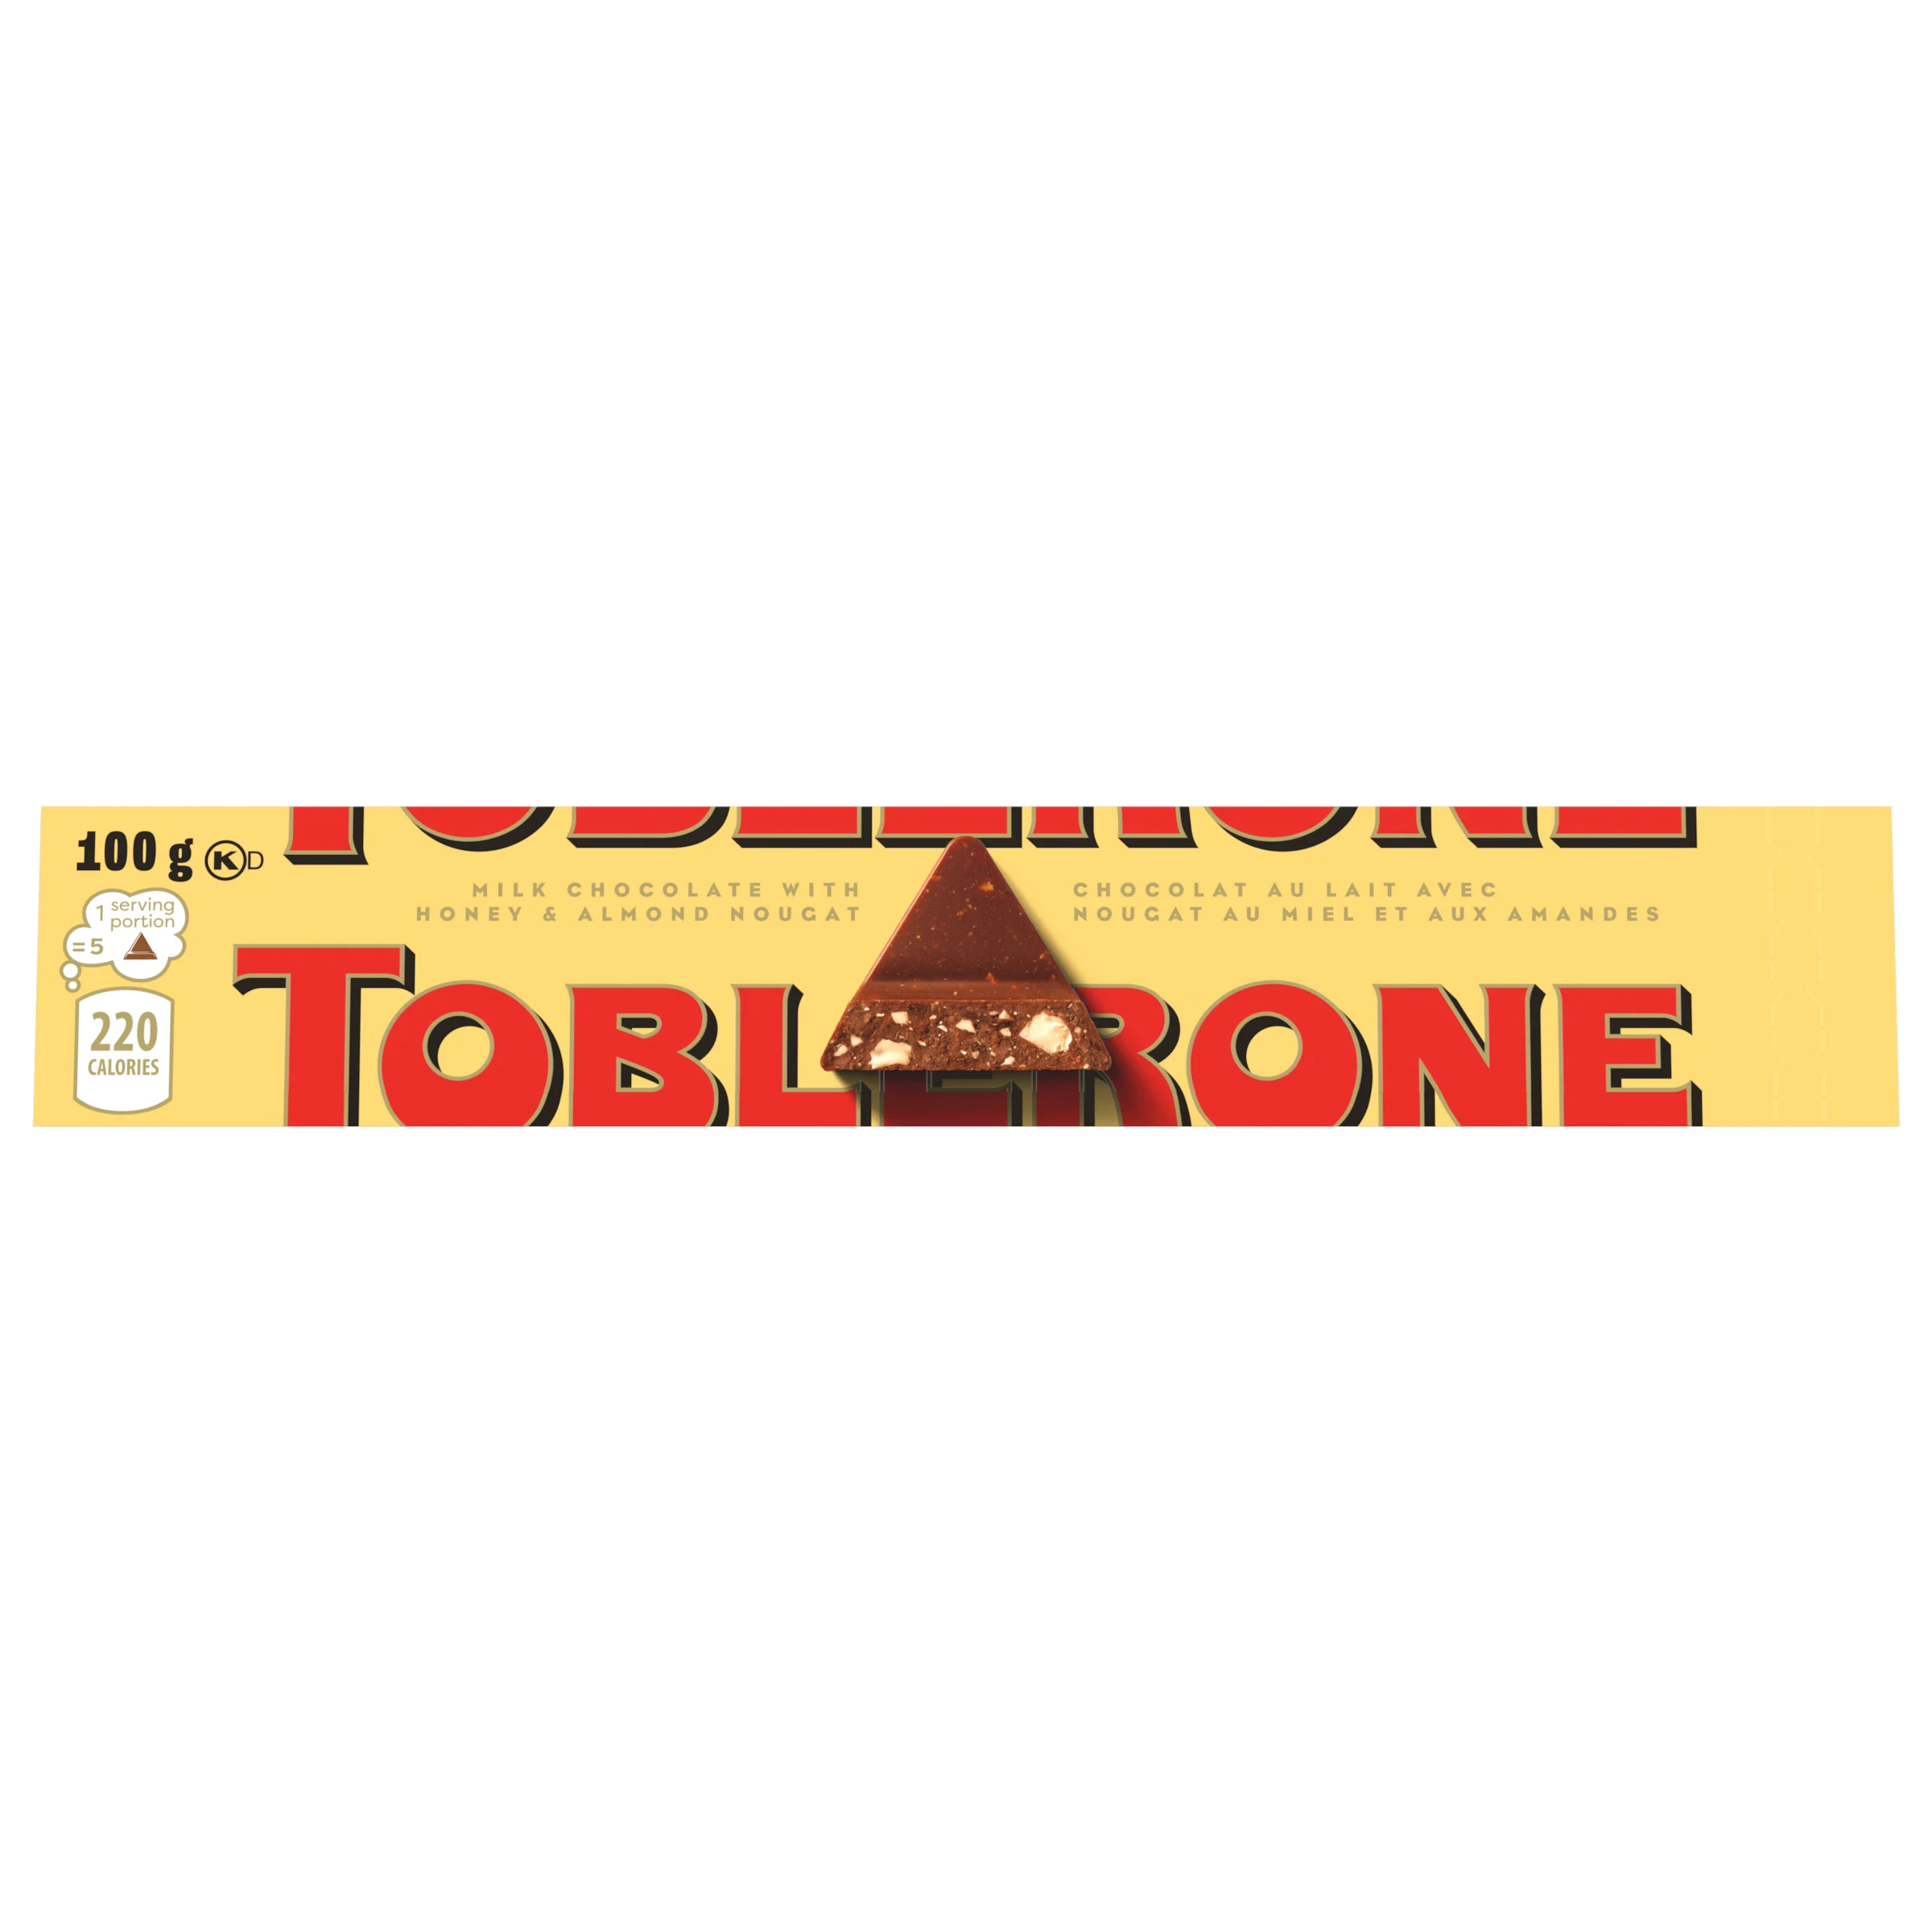 TOBLERONE MILK CHOCOLATE WITH HONEY AND ALMOND NOUGAT BAR (100 G)